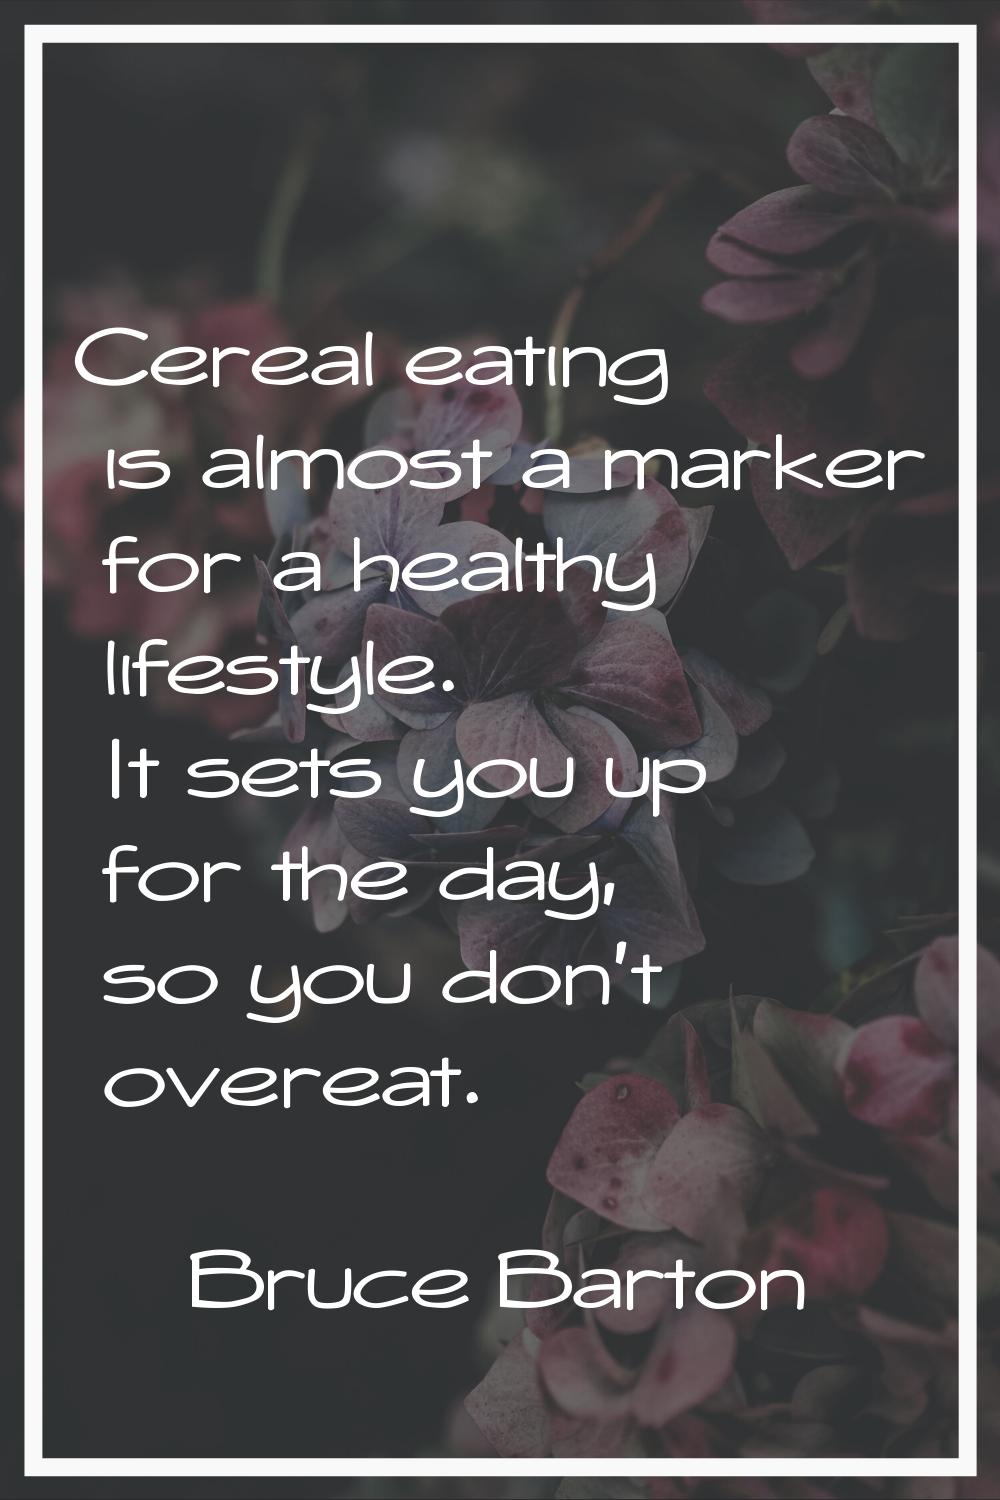 Cereal eating is almost a marker for a healthy lifestyle. It sets you up for the day, so you don't 